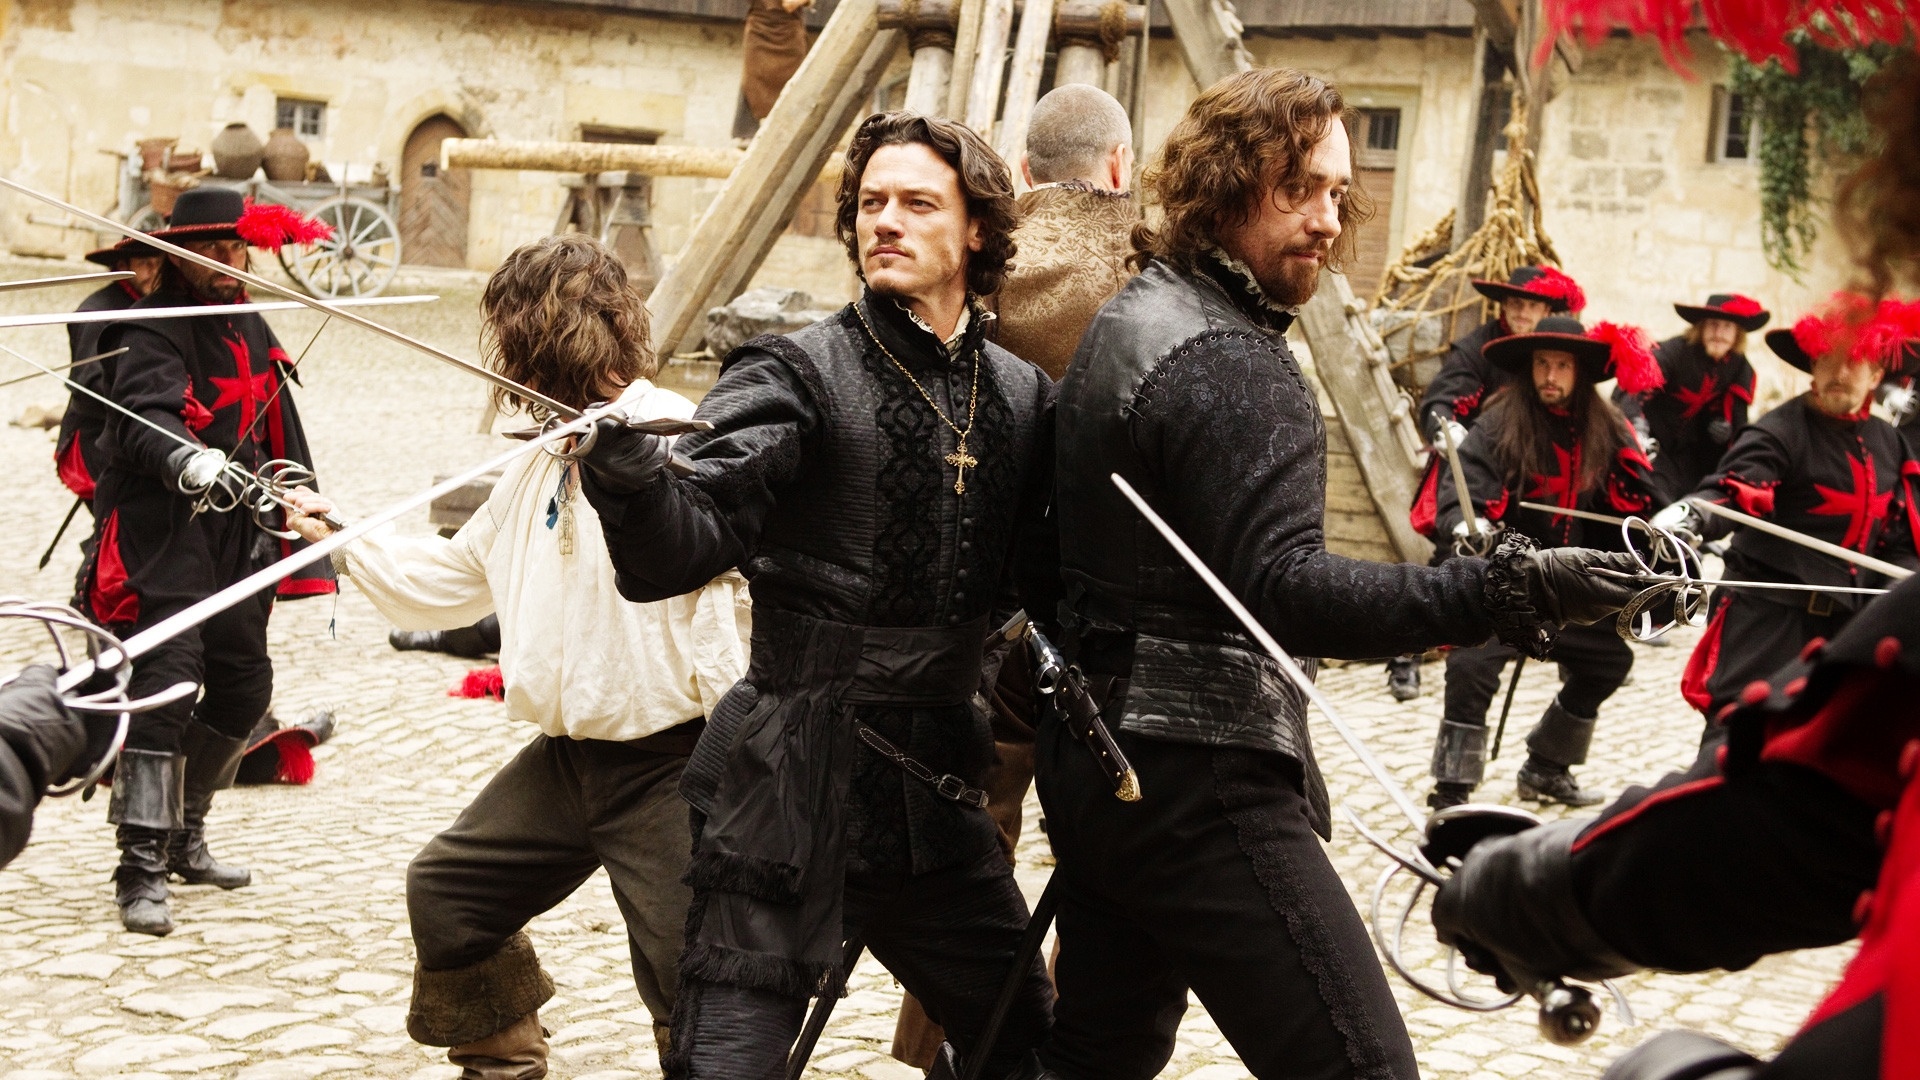 The Three Musketeers Movie for 1920 x 1080 HDTV 1080p resolution